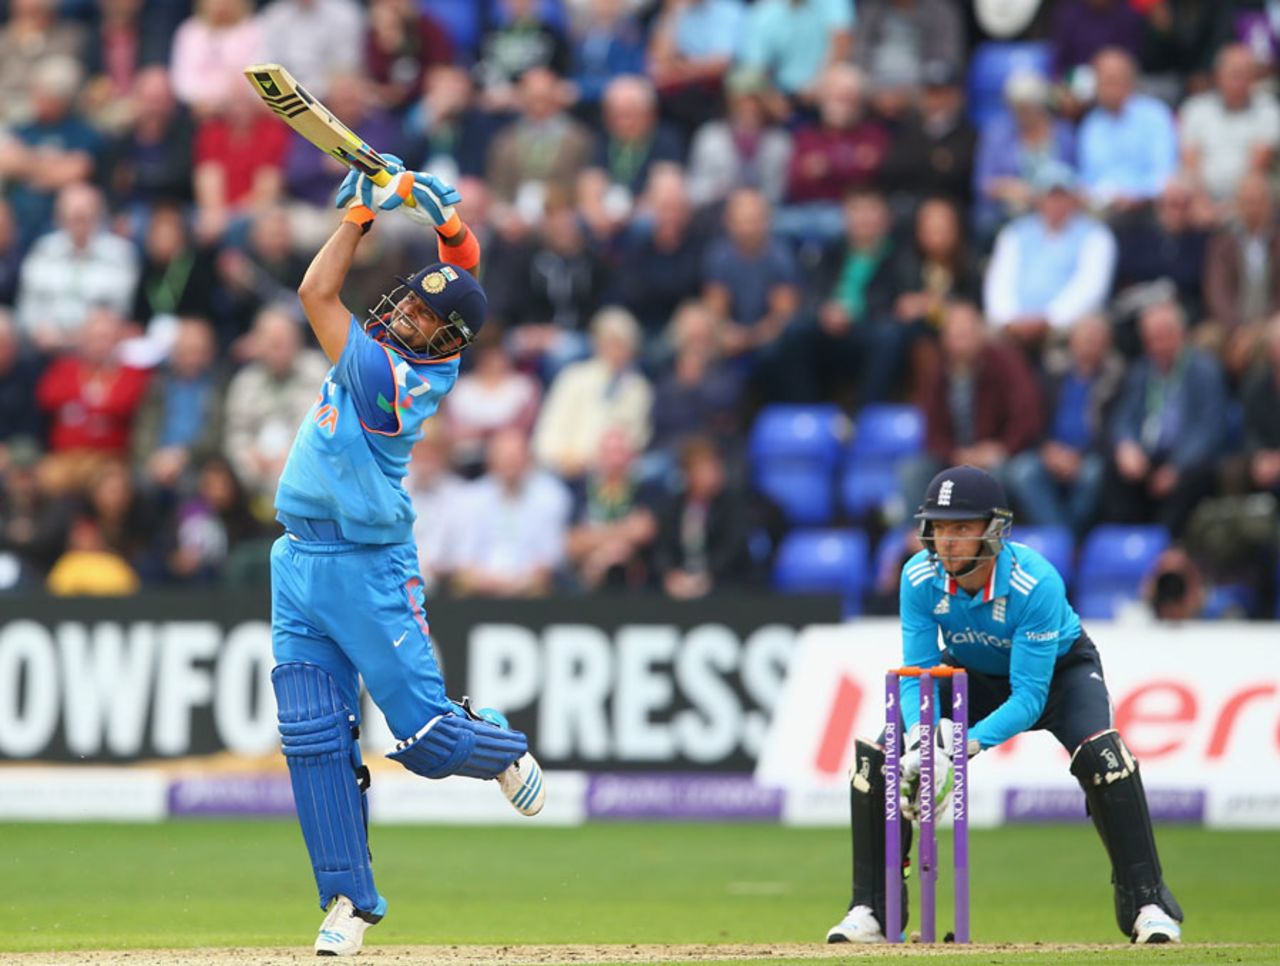 Suresh Raina goes over the top, England v India, 2nd ODI, Cardiff, August 27, 2014